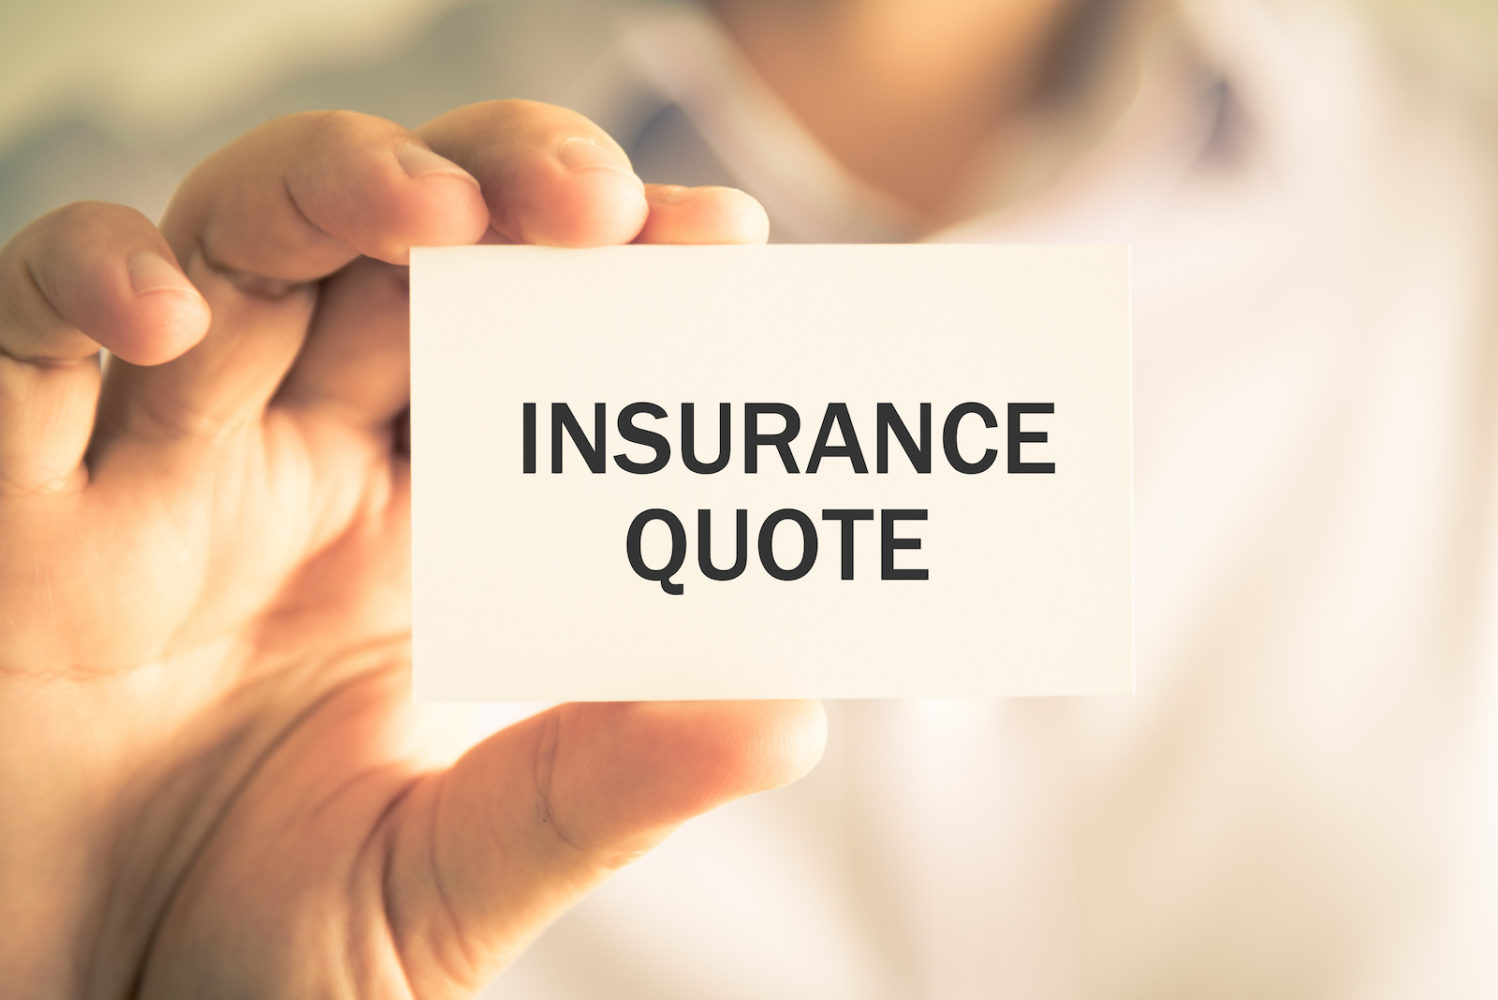 Business Insurance Quotes - ALIGNED Insurance Brokers